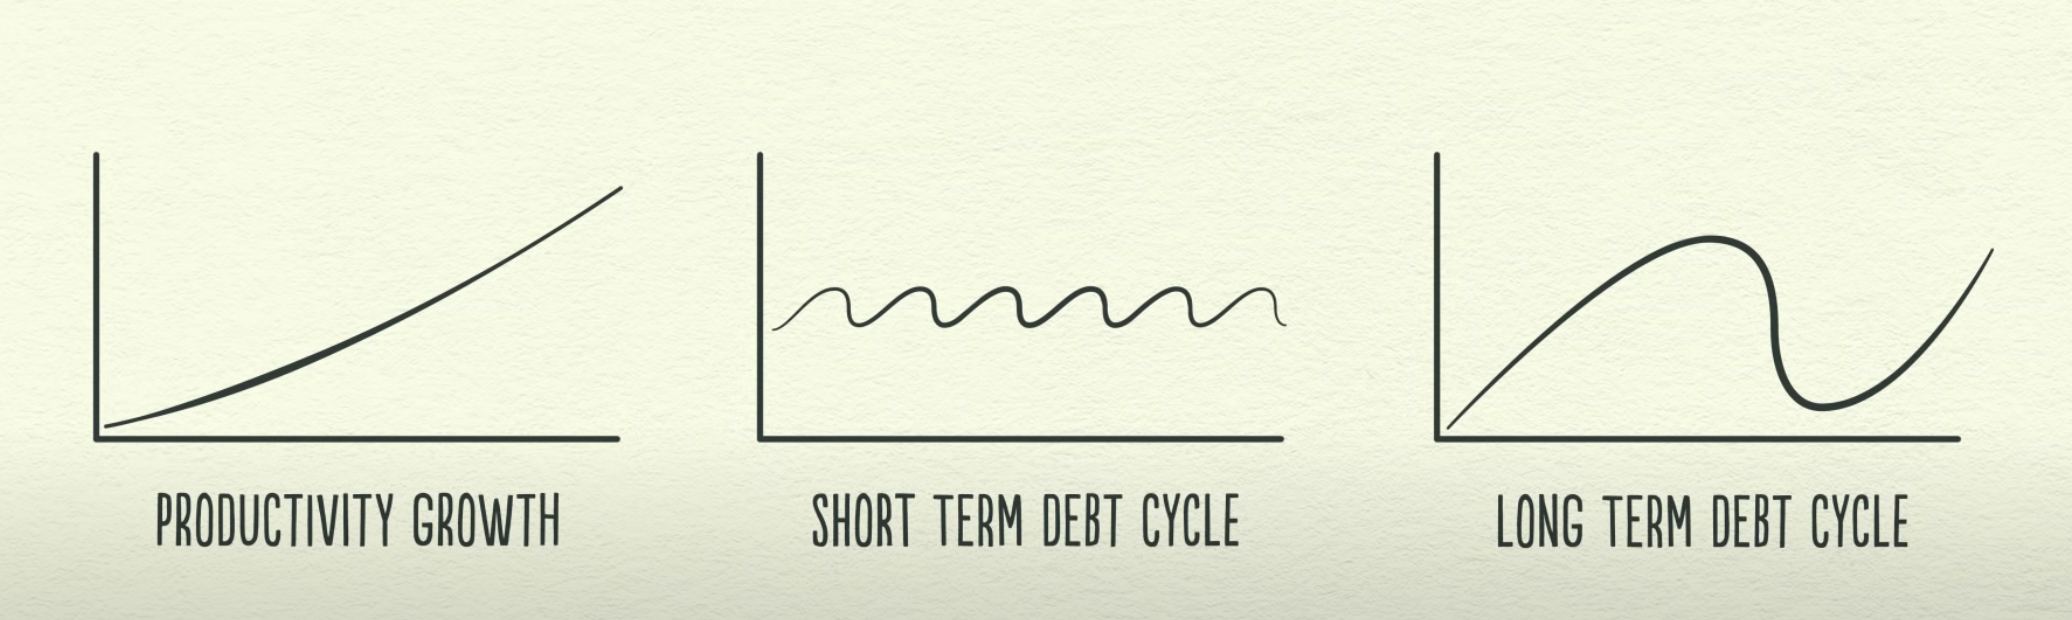 3 Forces of Economy are: 1. Productivity Growth, 2. Short-term debt cycle, 3. Long-term debt cycle